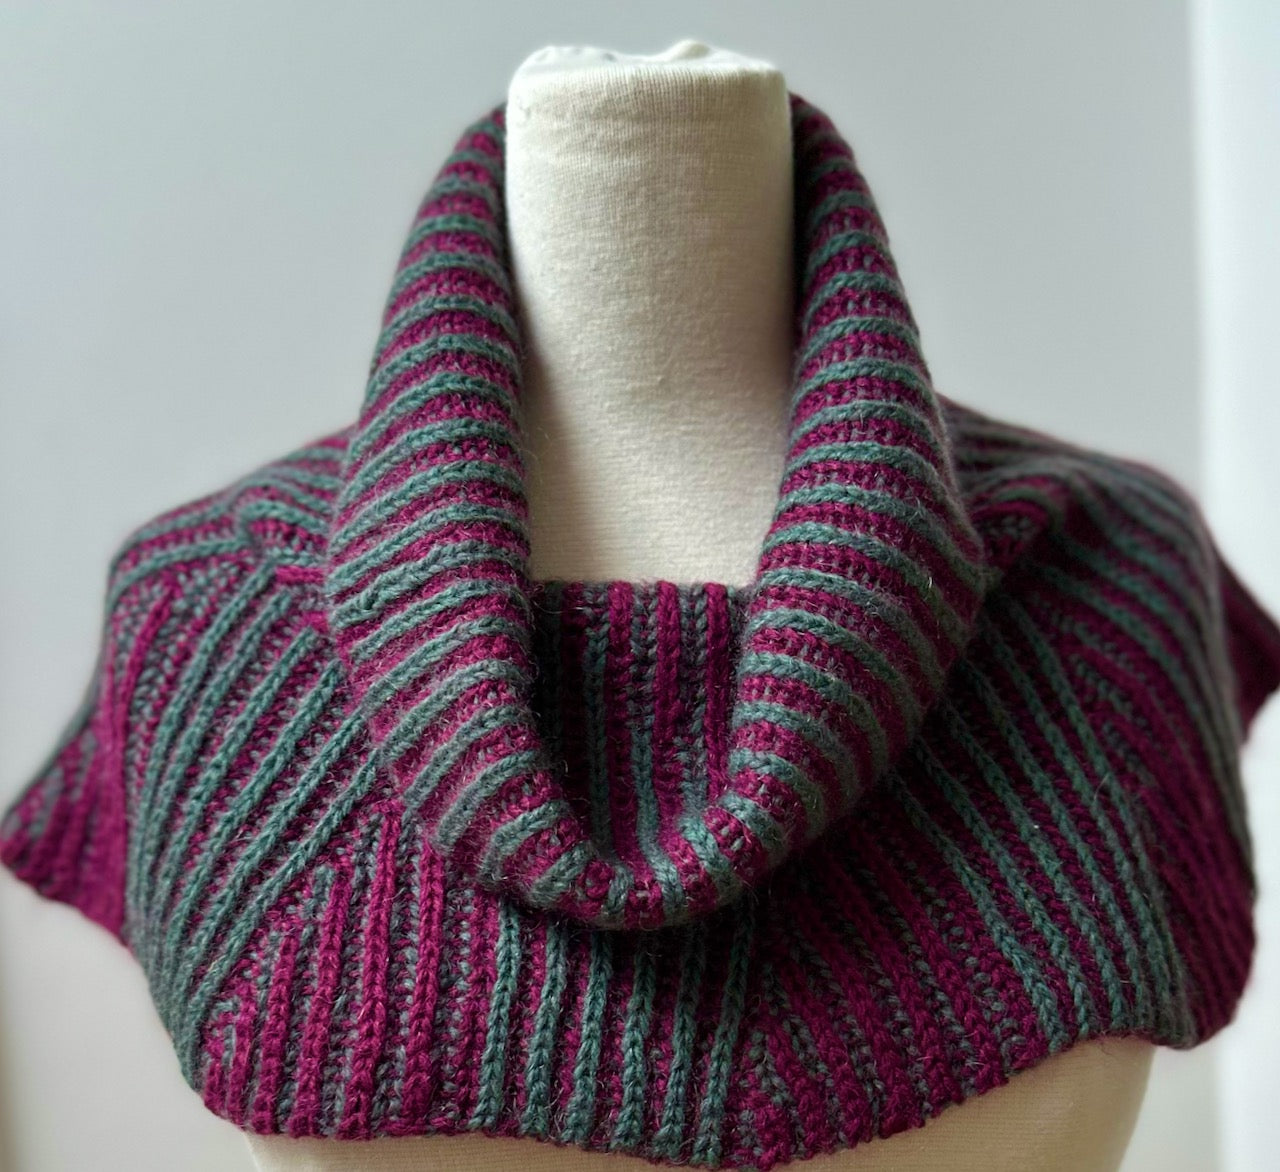 Next Steps Knitting Class - Introduction to Brioche with Suzanne Strachan